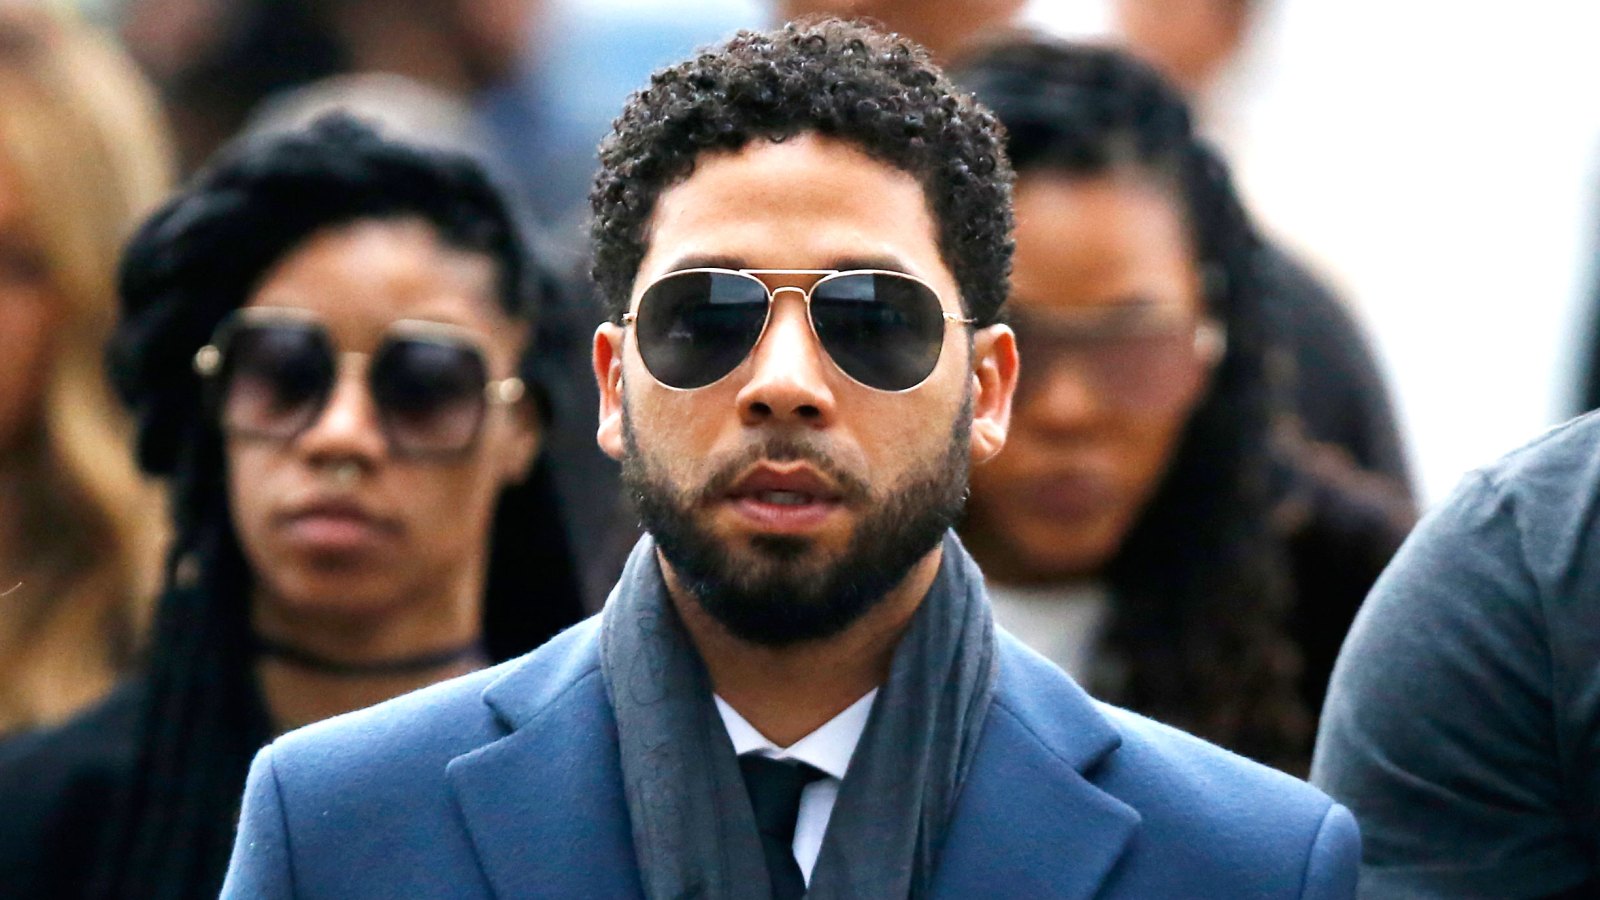 Jussie Smollett Pleads Not Guilty to 16 Counts of Felony Disorderly Conduct